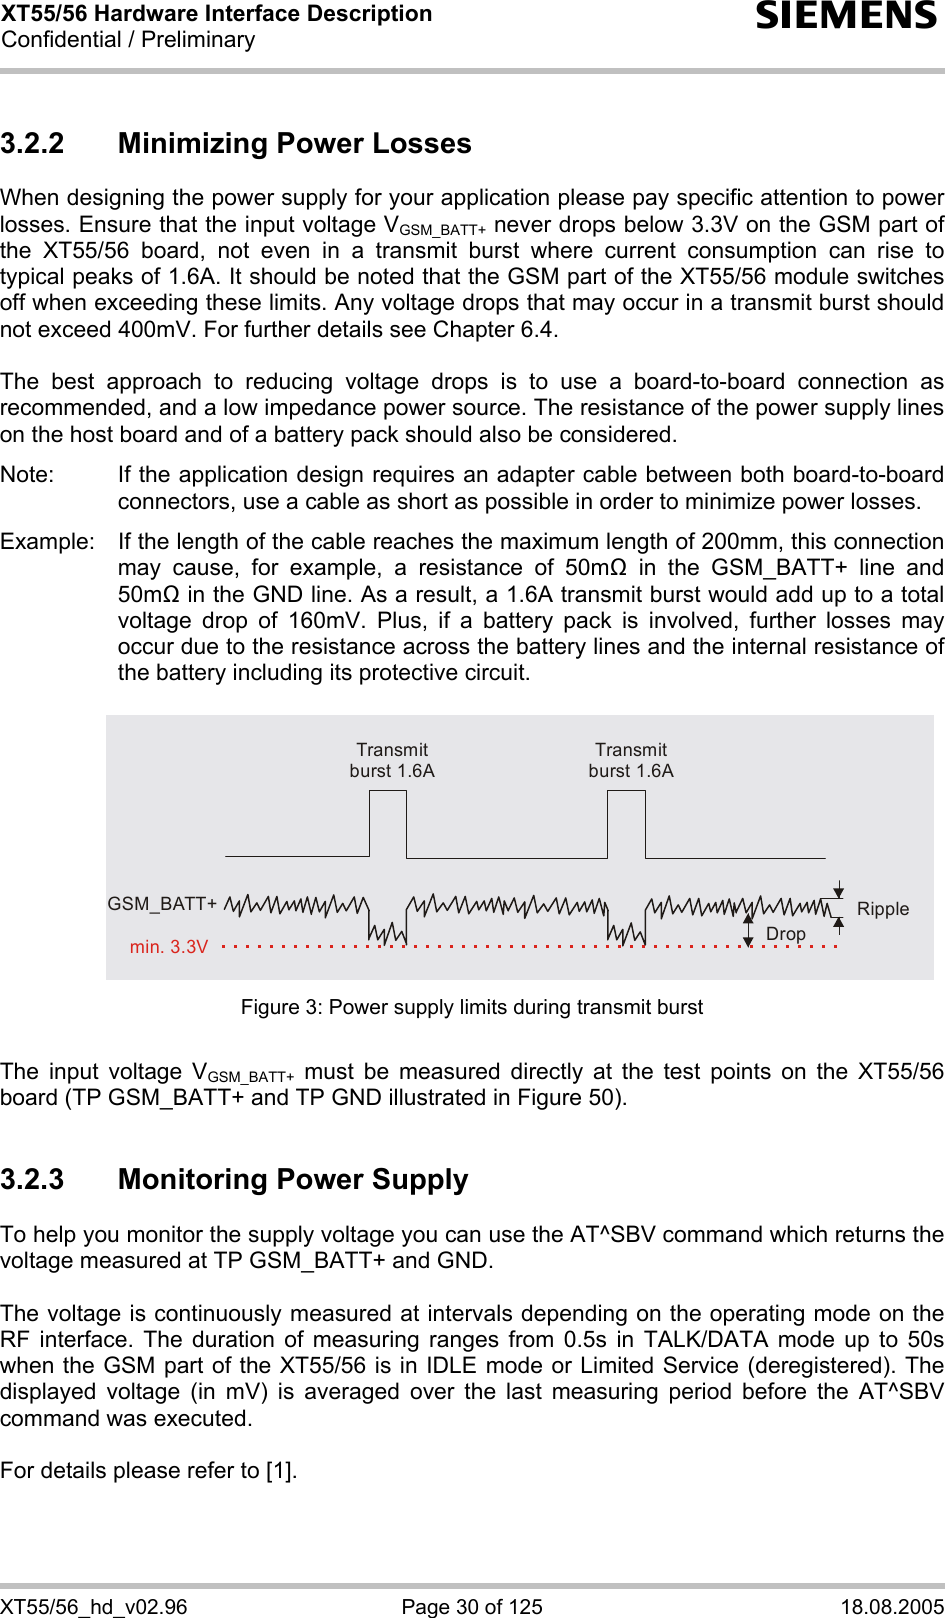 XT55/56 Hardware Interface Description Confidential / Preliminary s XT55/56_hd_v02.96  Page 30 of 125  18.08.2005 3.2.2  Minimizing Power Losses When designing the power supply for your application please pay specific attention to power losses. Ensure that the input voltage VGSM_BATT+ never drops below 3.3V on the GSM part of the XT55/56 board, not even in a transmit burst where current consumption can rise to typical peaks of 1.6A. It should be noted that the GSM part of the XT55/56 module switches off when exceeding these limits. Any voltage drops that may occur in a transmit burst should not exceed 400mV. For further details see Chapter 6.4.  The best approach to reducing voltage drops is to use a board-to-board connection as recommended, and a low impedance power source. The resistance of the power supply lines on the host board and of a battery pack should also be considered.  Note:  If the application design requires an adapter cable between both board-to-board connectors, use a cable as short as possible in order to minimize power losses.   Example:  If the length of the cable reaches the maximum length of 200mm, this connection may cause, for example, a resistance of 50m in the GSM_BATT+ line and 50m in the GND line. As a result, a 1.6A transmit burst would add up to a total voltage drop of 160mV. Plus, if a battery pack is involved, further losses may occur due to the resistance across the battery lines and the internal resistance of the battery including its protective circuit.    Transmit burst 1.6ATransmit burst 1.6ARippleDropmin. 3.3VGSM_BATT+ Figure 3: Power supply limits during transmit burst  The input voltage VGSM_BATT+ must be measured directly at the test points on the XT55/56 board (TP GSM_BATT+ and TP GND illustrated in Figure 50).  3.2.3  Monitoring Power Supply To help you monitor the supply voltage you can use the AT^SBV command which returns the voltage measured at TP GSM_BATT+ and GND.   The voltage is continuously measured at intervals depending on the operating mode on the RF interface. The duration of measuring ranges from 0.5s in TALK/DATA mode up to 50s when the GSM part of the XT55/56 is in IDLE mode or Limited Service (deregistered). The displayed voltage (in mV) is averaged over the last measuring period before the AT^SBV command was executed.   For details please refer to [1].  